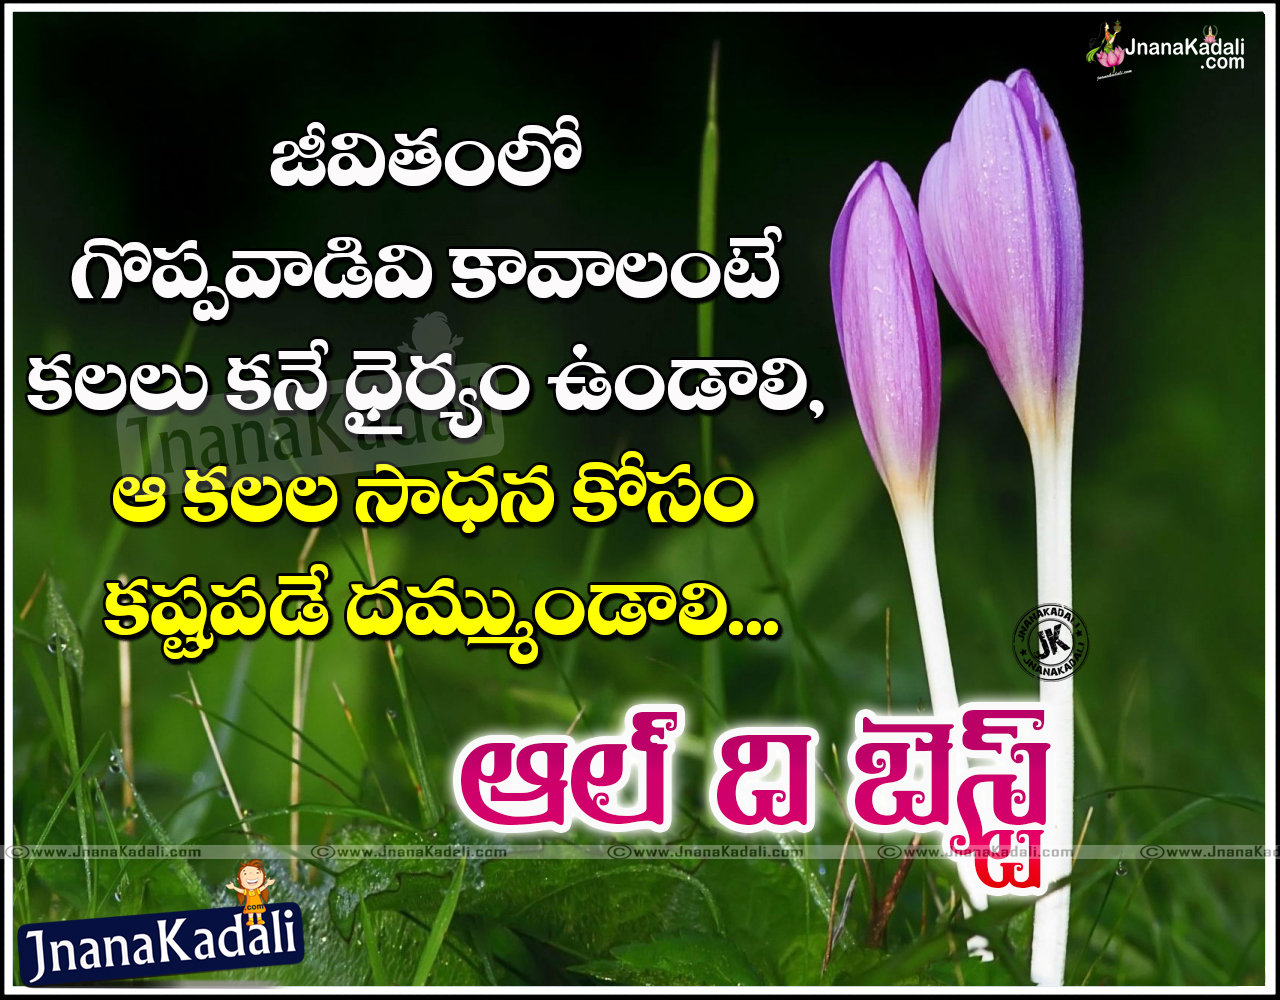 All The Best Quotations for Your Boss in Telugu Language Top inspiring All The Best